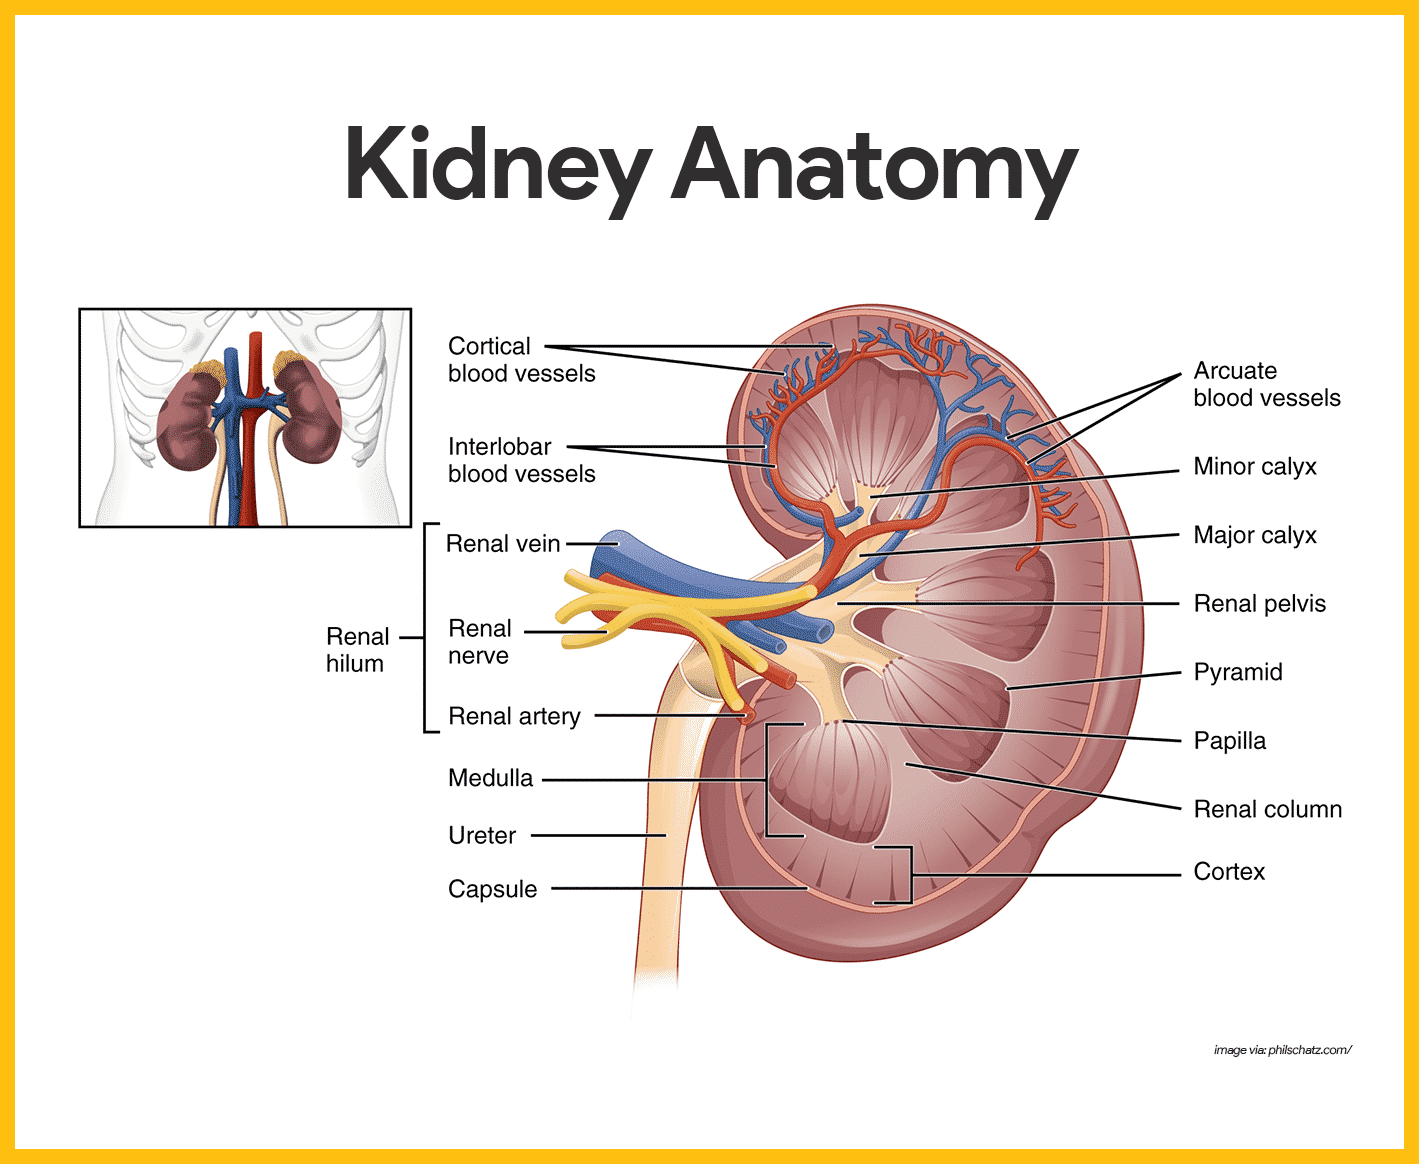 ultrasound pictures of kidneys and bladder